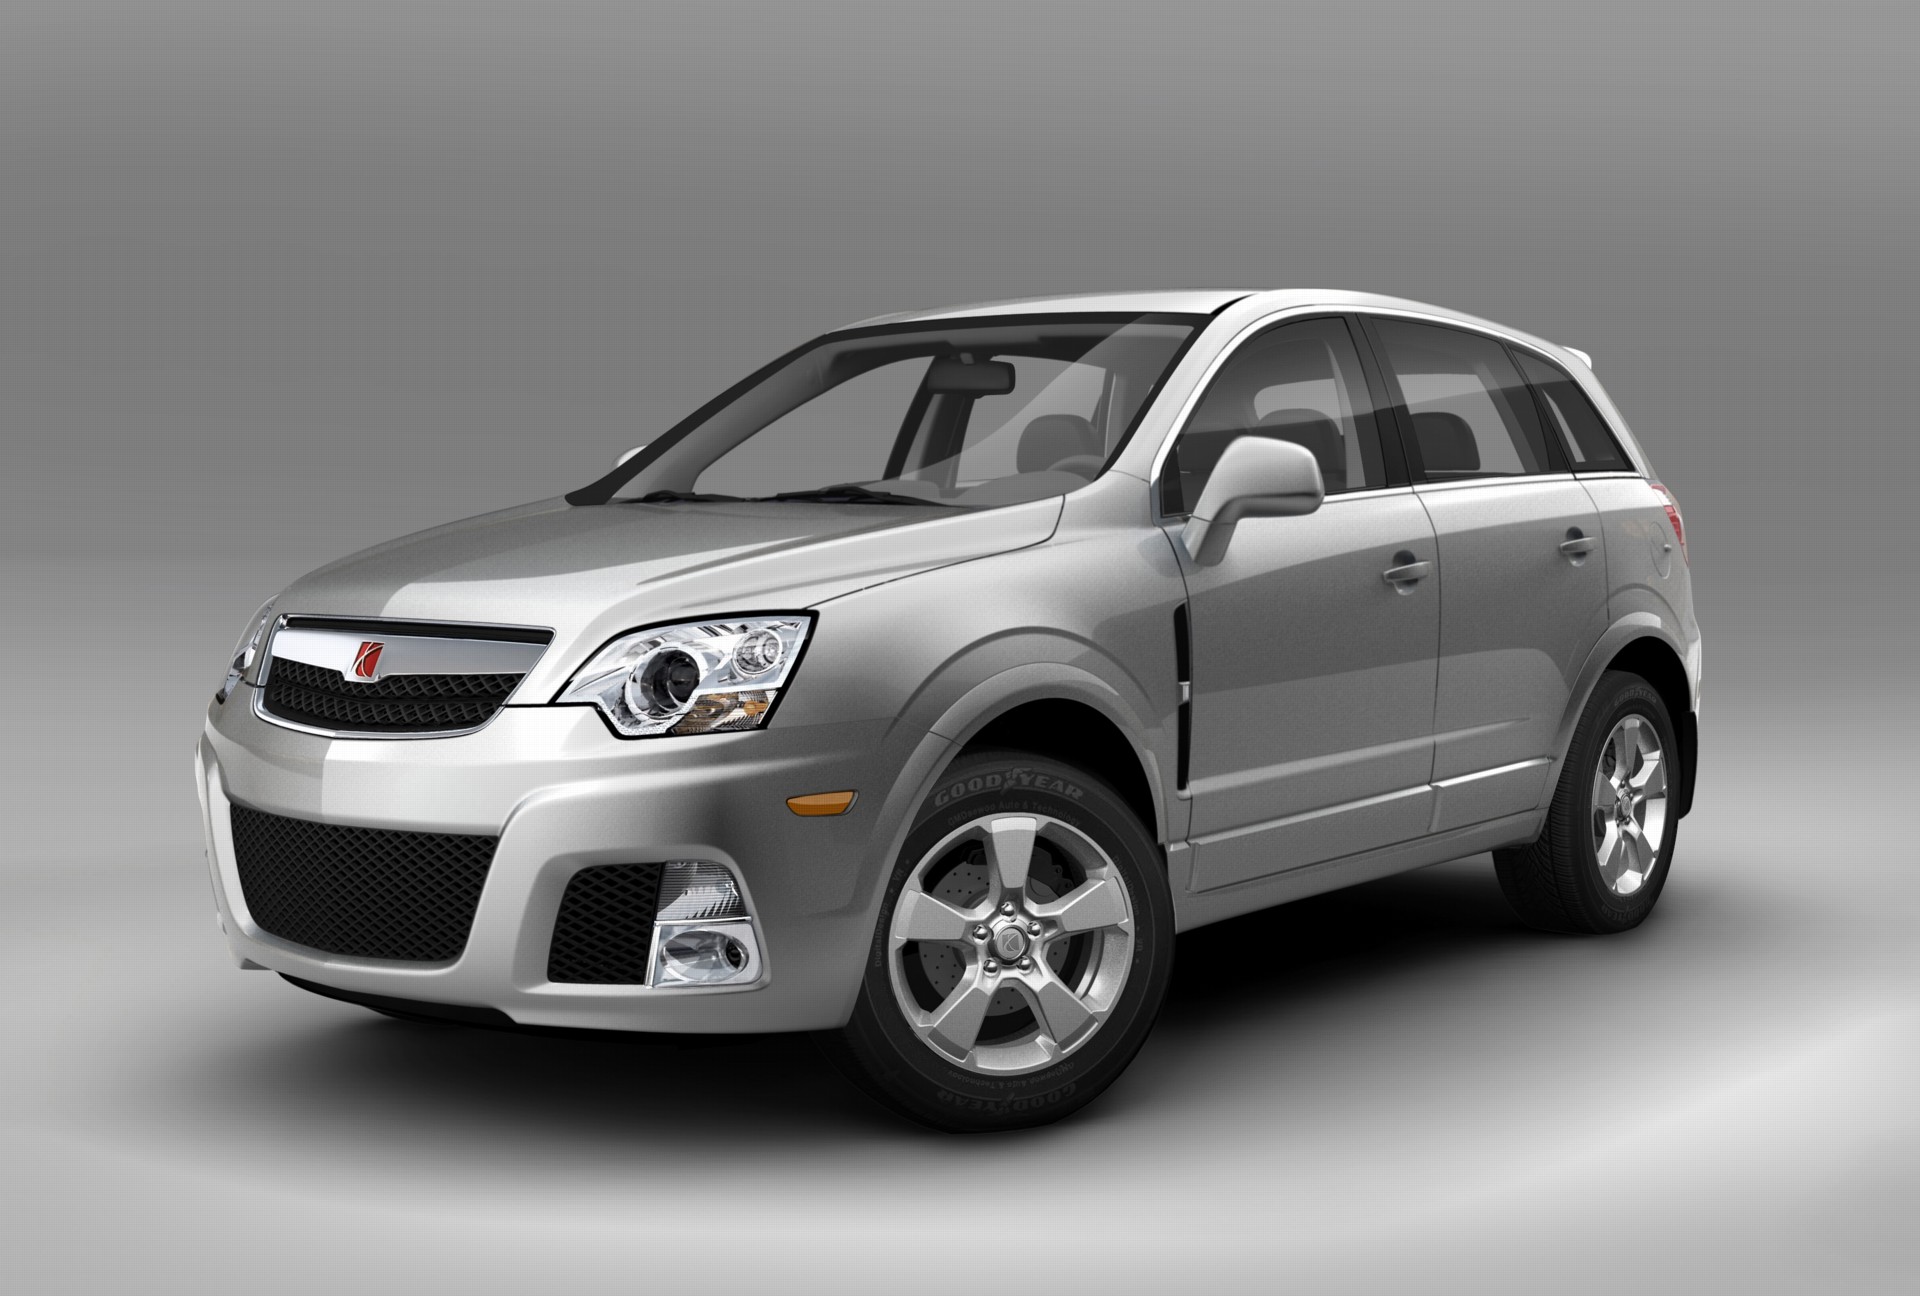 2008 Saturn Vue Red Line News and Information